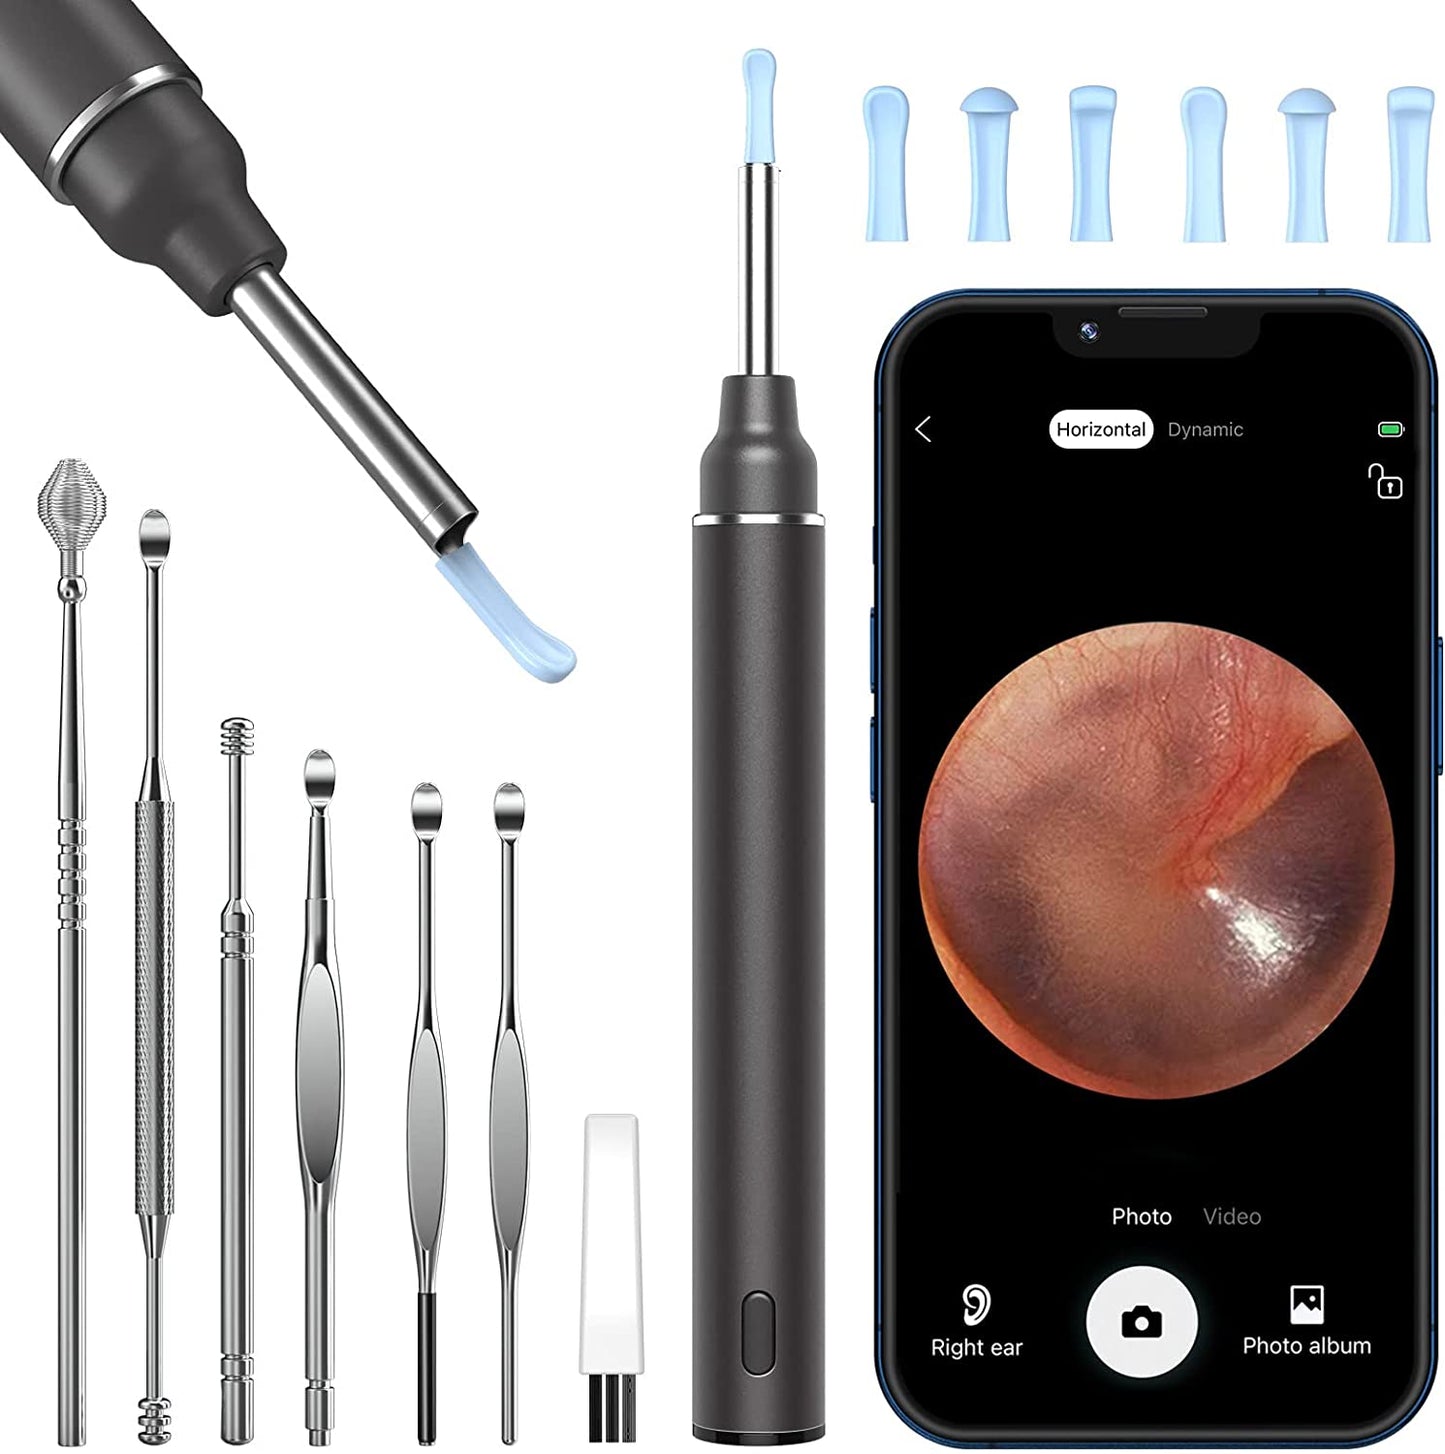 Visual Ear Scoop Picker Ear Wax Removal Tool Cleaner WiFi with Camera Set  Visibl